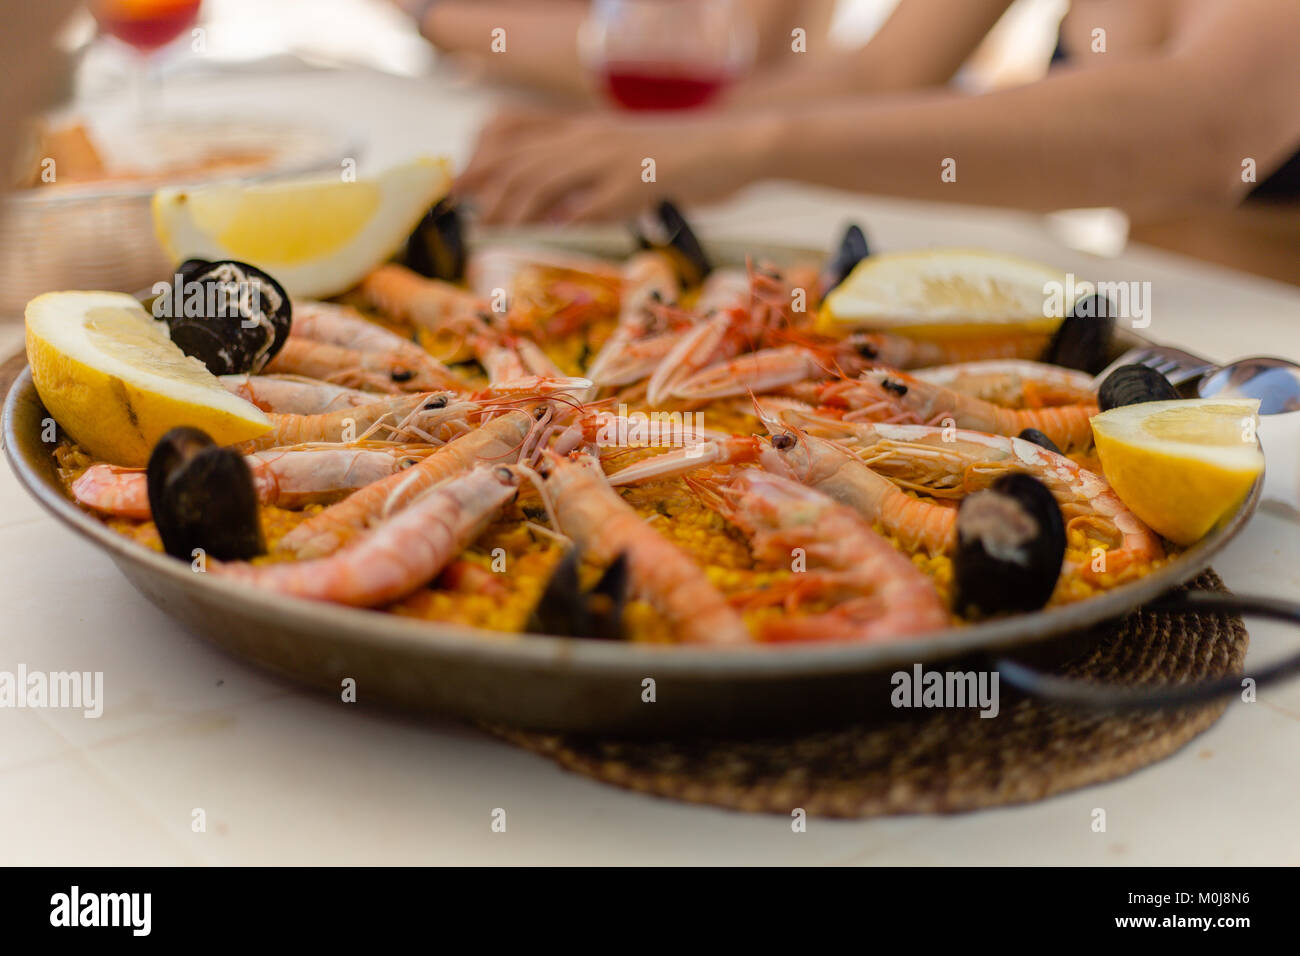 Paella: a traditional spanish/mediterranean seafood dish, served in the traditional pan. An excellent meal to share with friends and family by the sea. Stock Photo